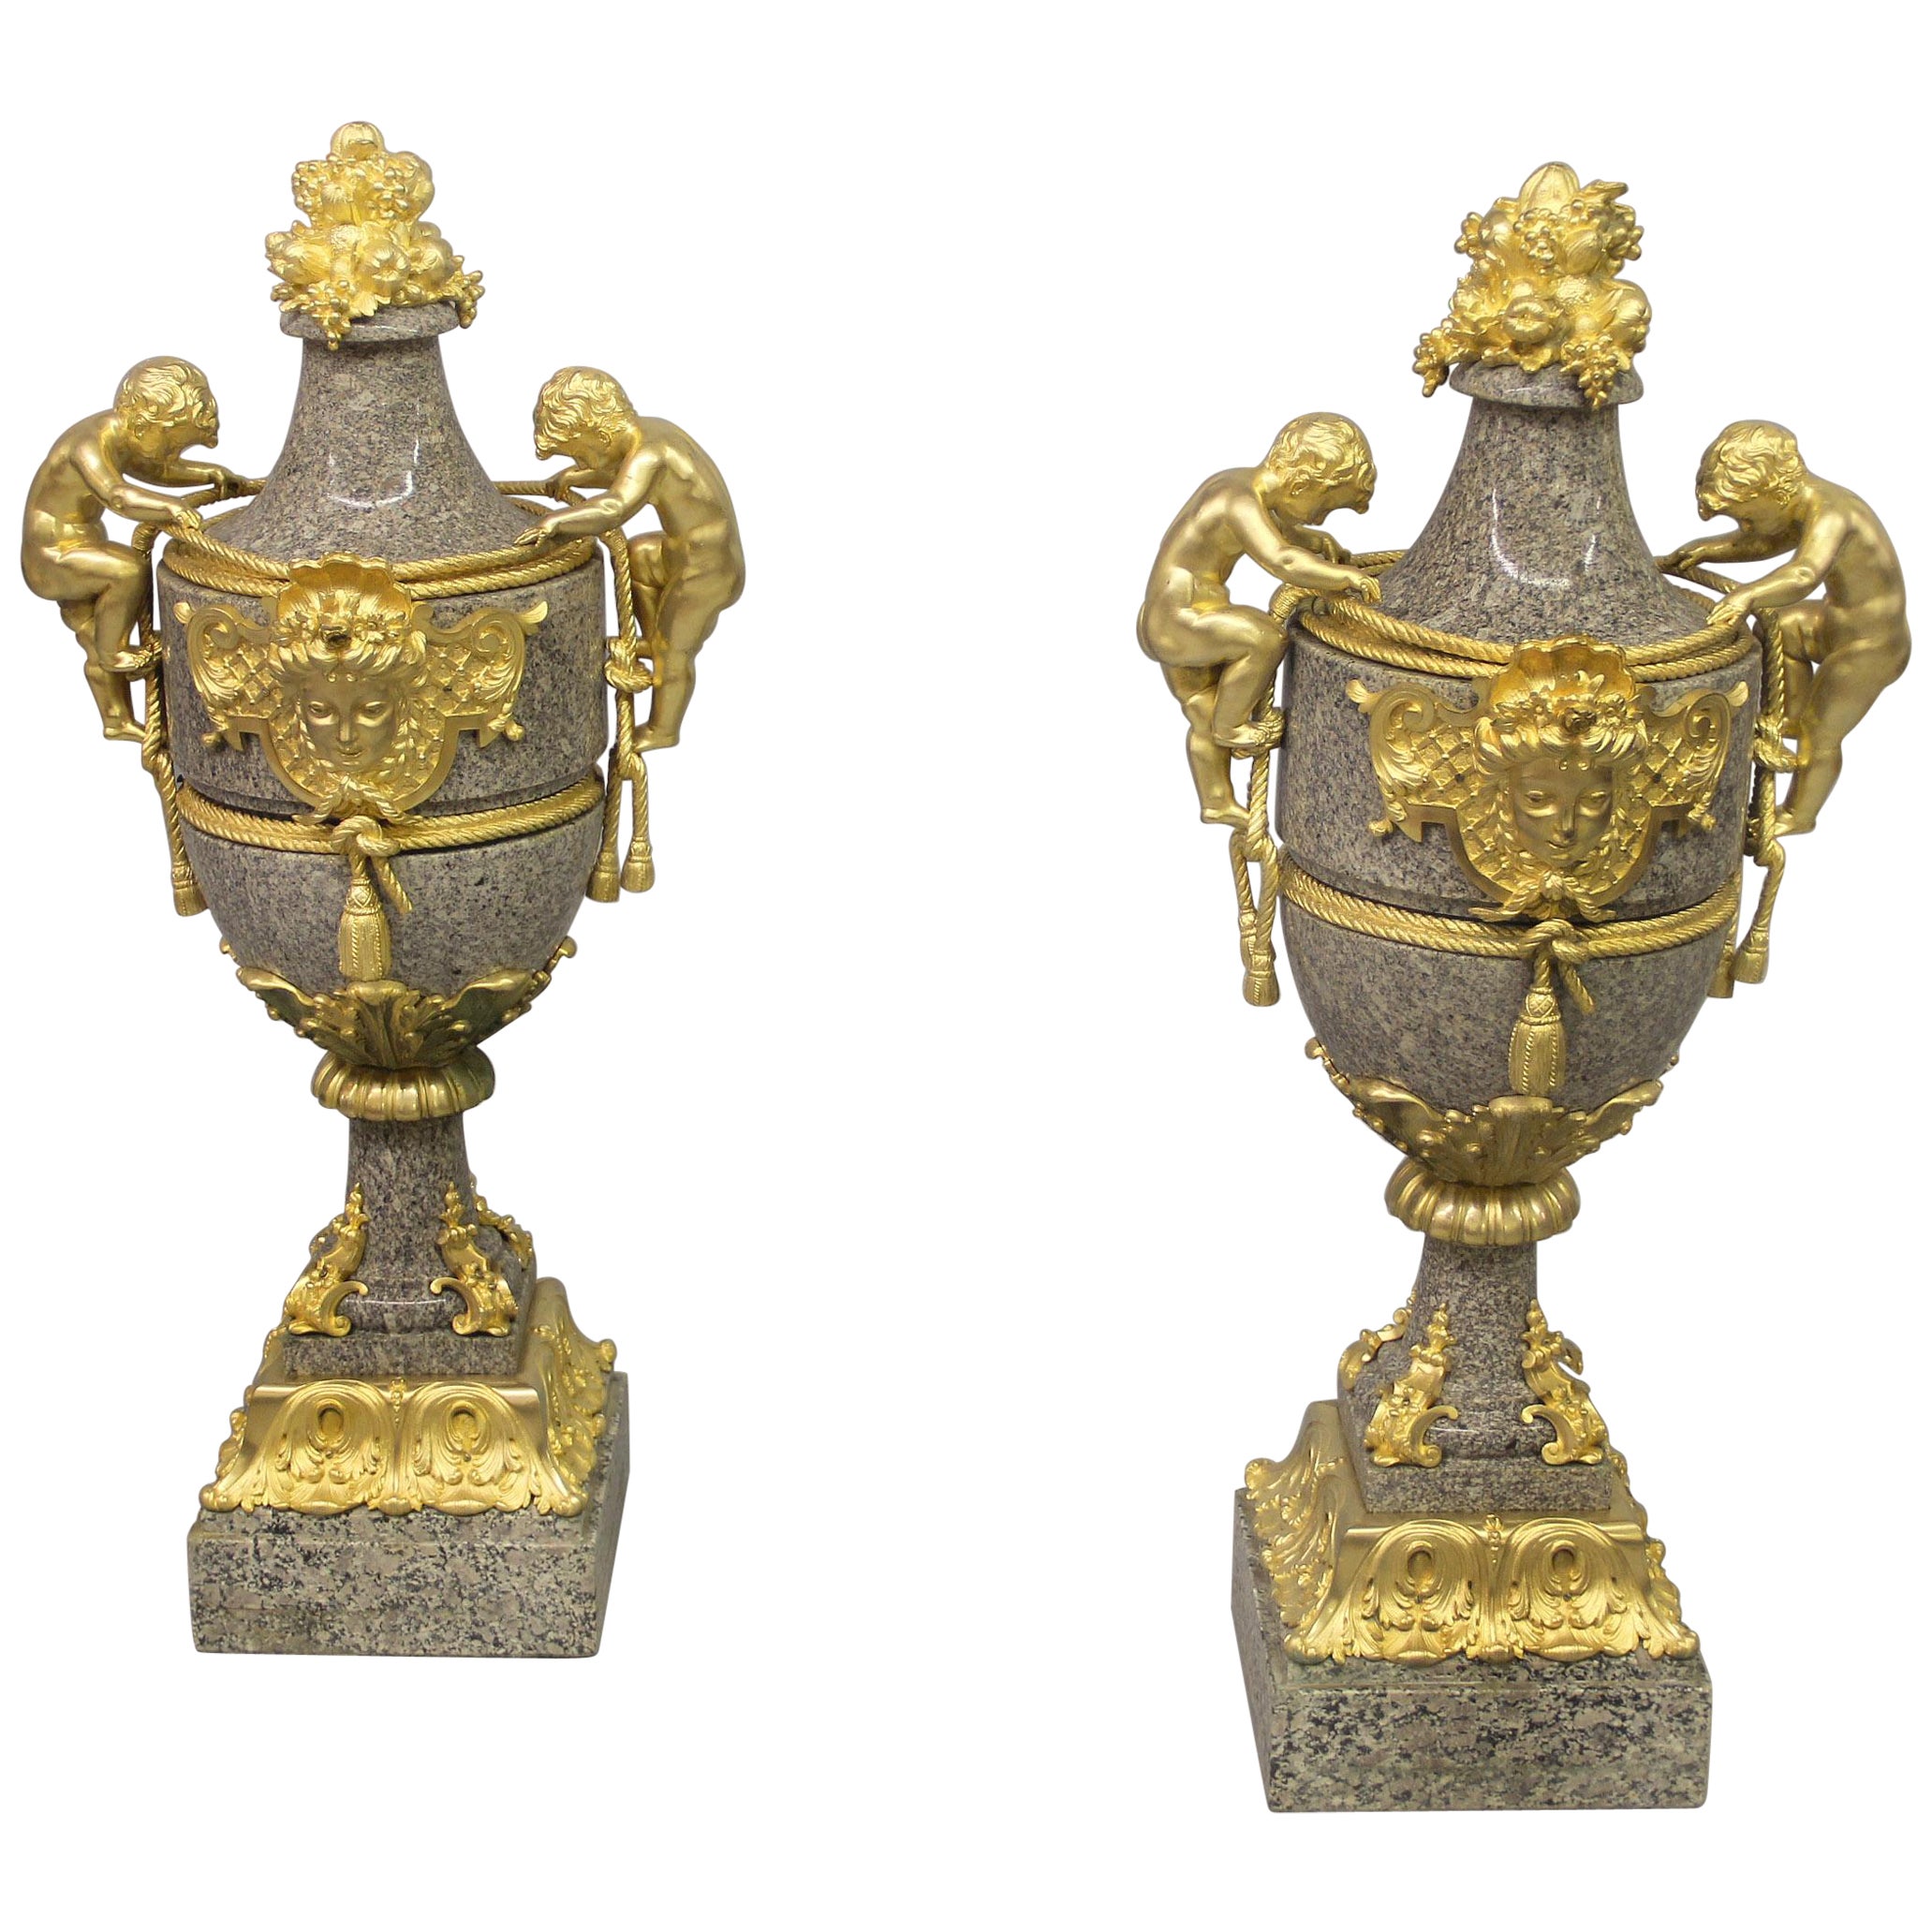 Excellent Quality Pair of Large 19th Century Gilt Bronze Mounted Granite Vases For Sale